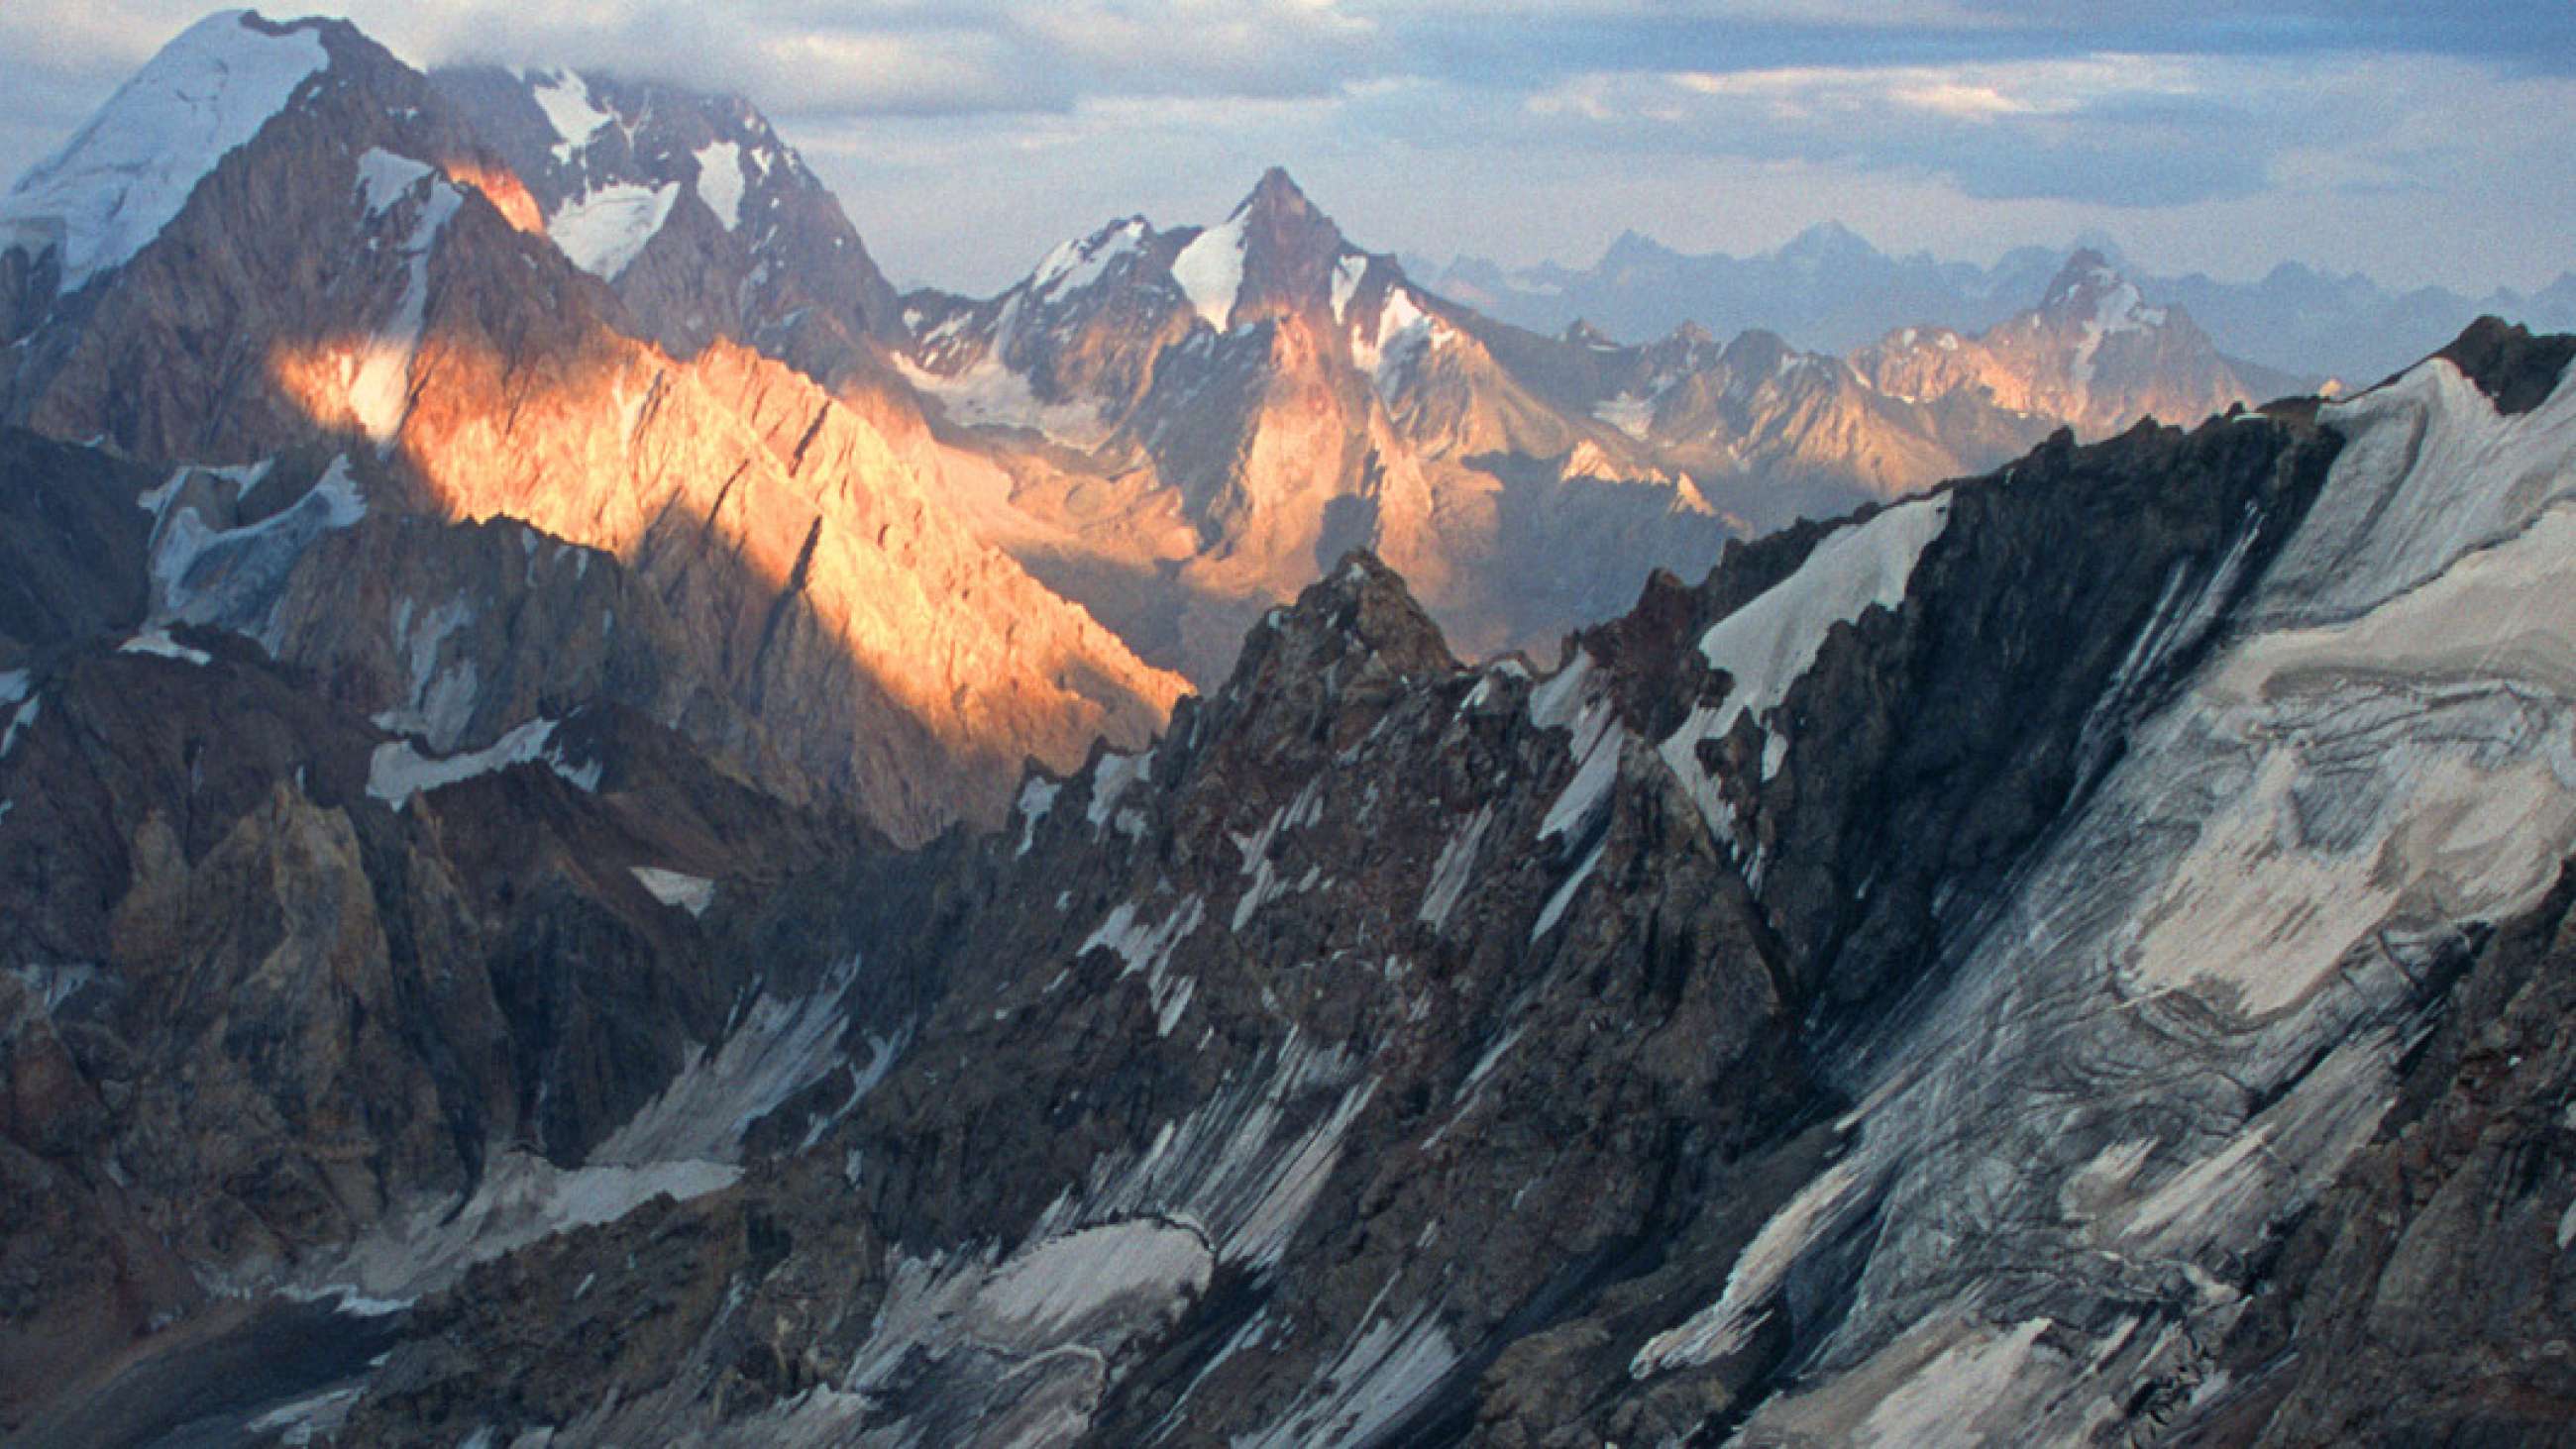 Overview of the mountains in Tadzjikistan